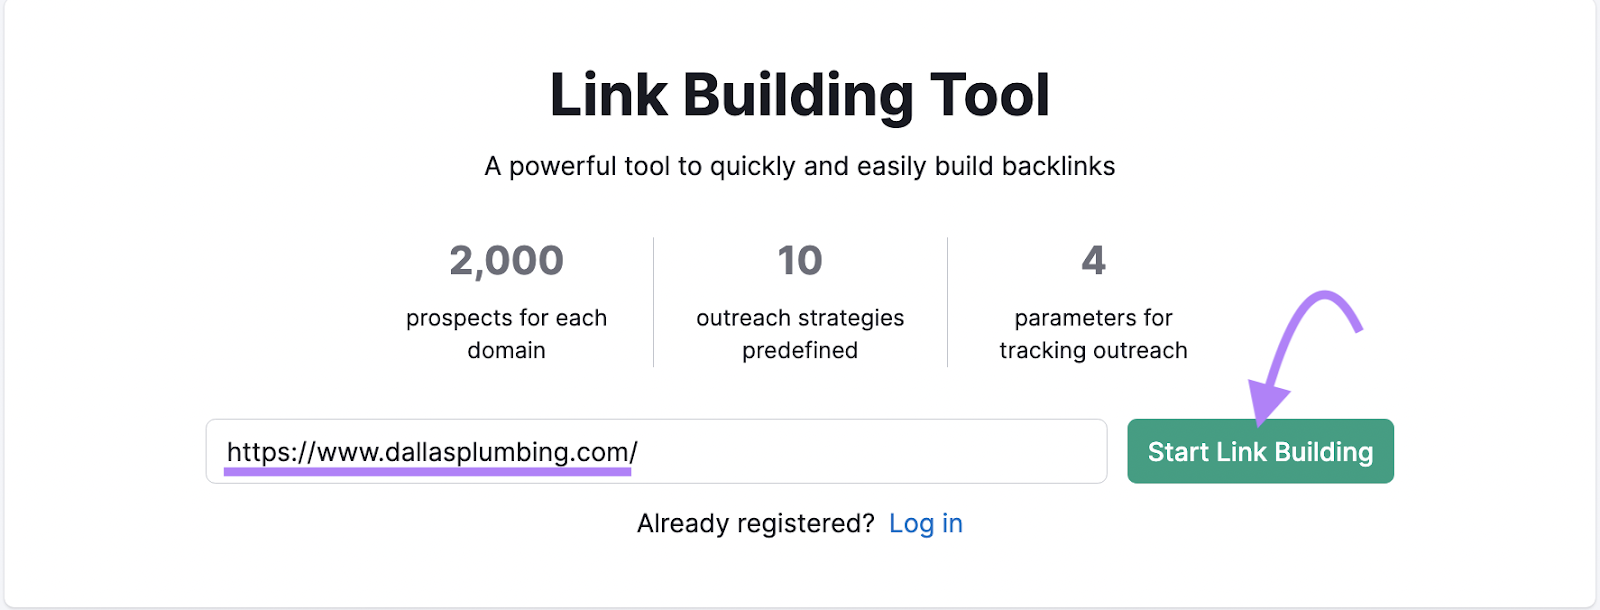 Link Building Tool search bar